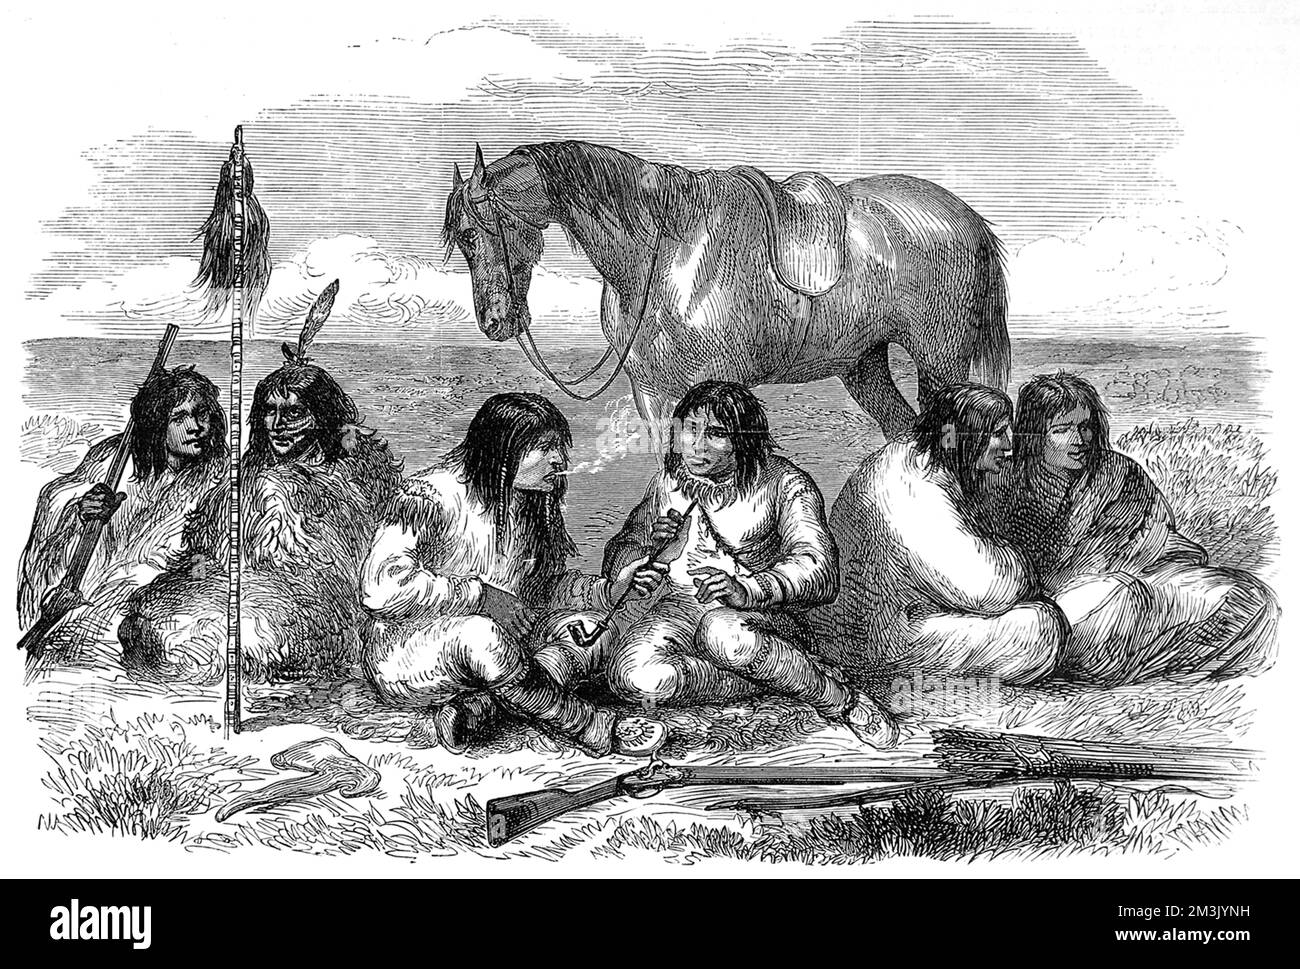 A group of male Prairie Cree Indians smoking long pipes and talking together. The Cree are wearing fringed buckskin and feathers in their hair, with rifles and a hatchet in the foreground and a horse in the background. Stock Photo